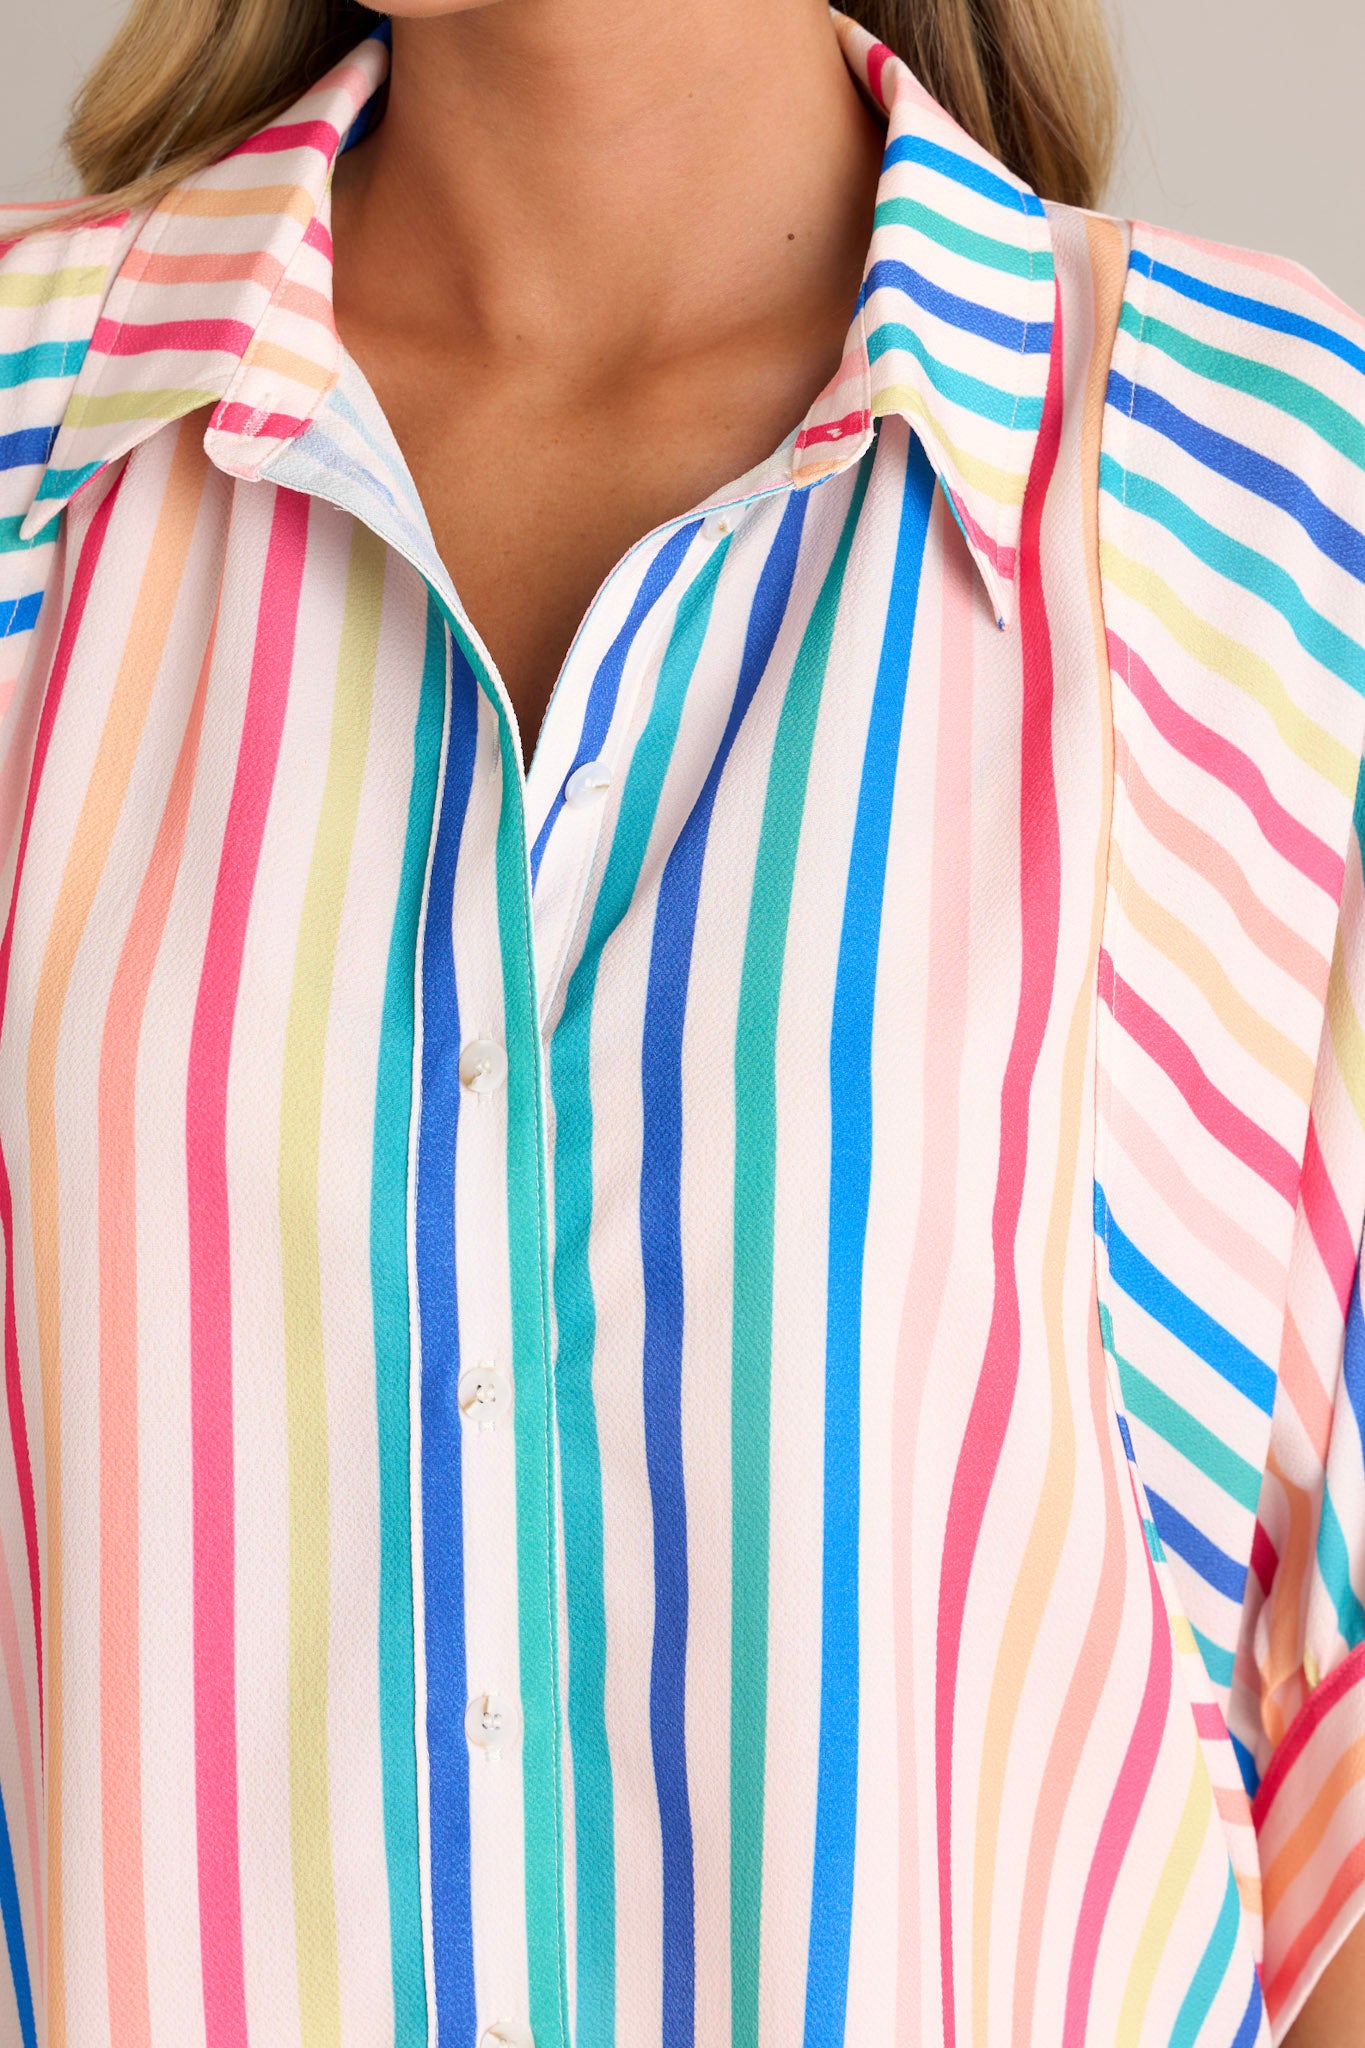 Close-up of the rainbow stripe top showing the collared neckline, full button front, and wide dolman button cuffed sleeves.